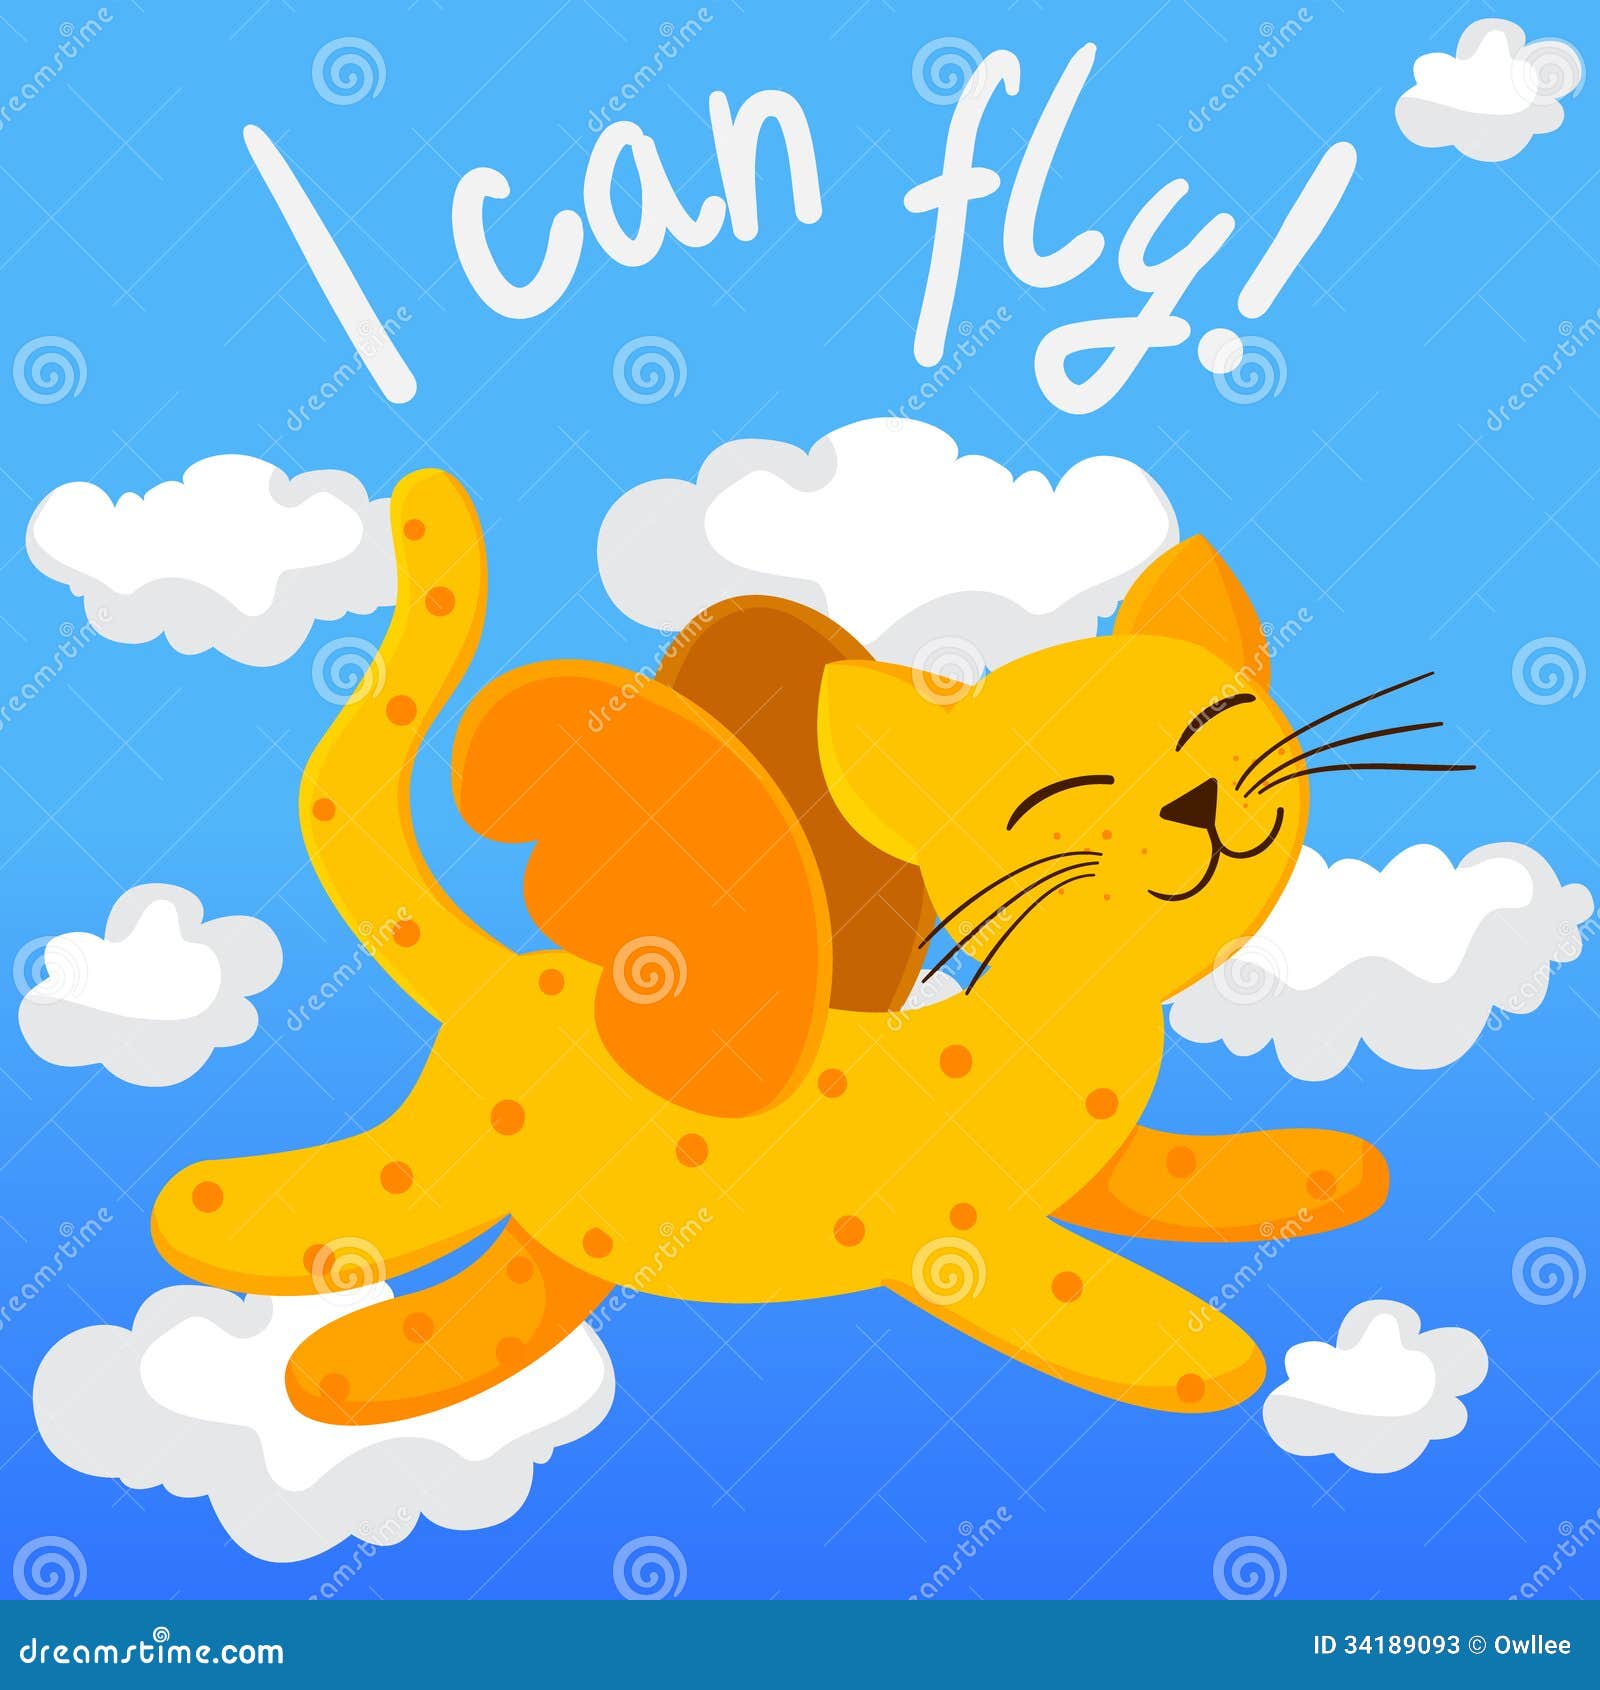  Cartoon  Flying Cat With Wings Stock Photos Image 34189093